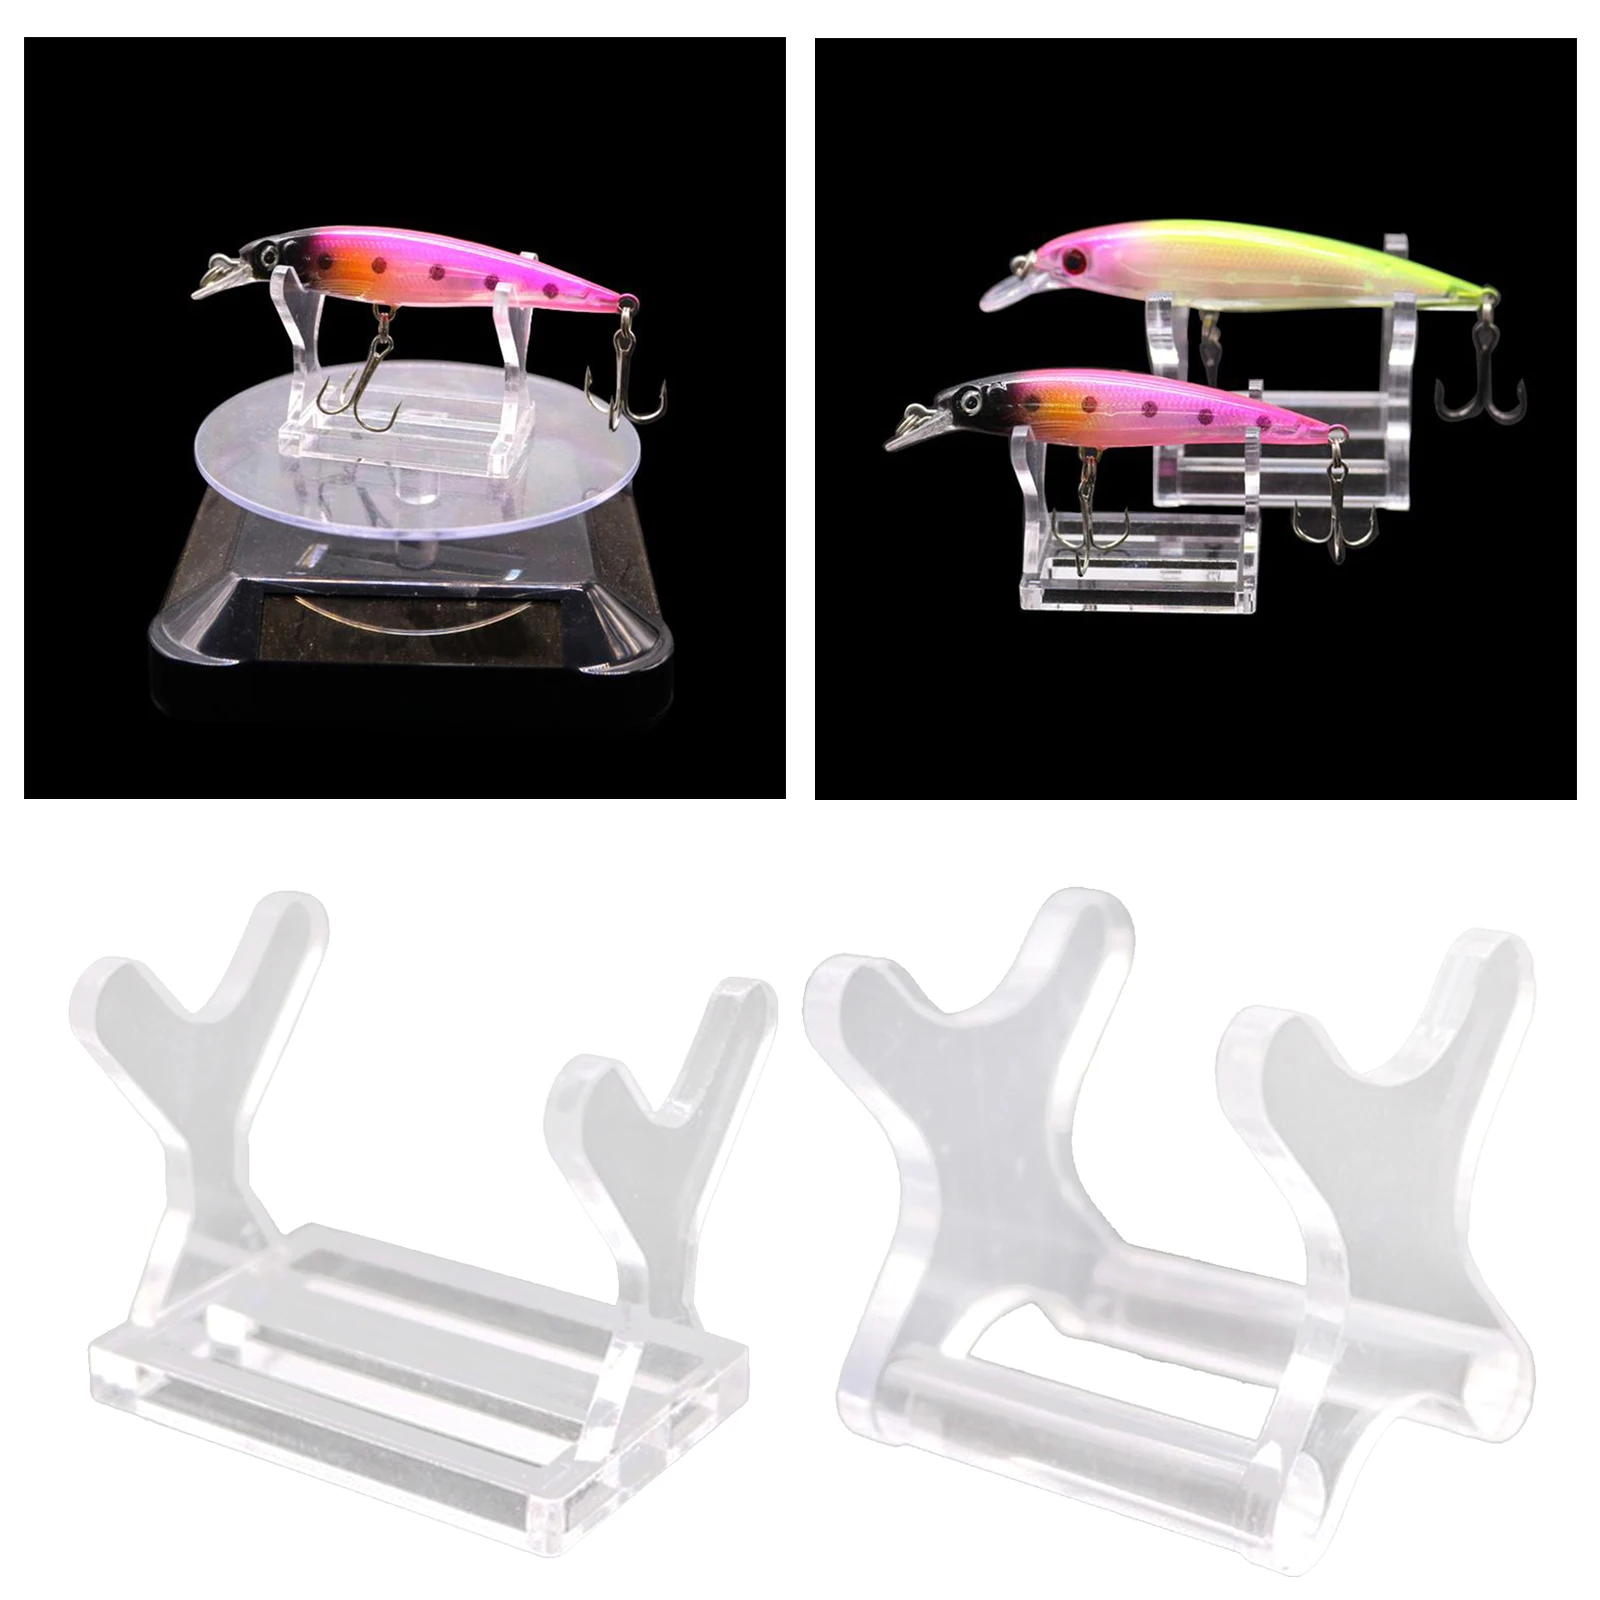 Store Acrylic Coins Bait Fishing Lure Showing Display Stand Easels Holder Shelf Collectable